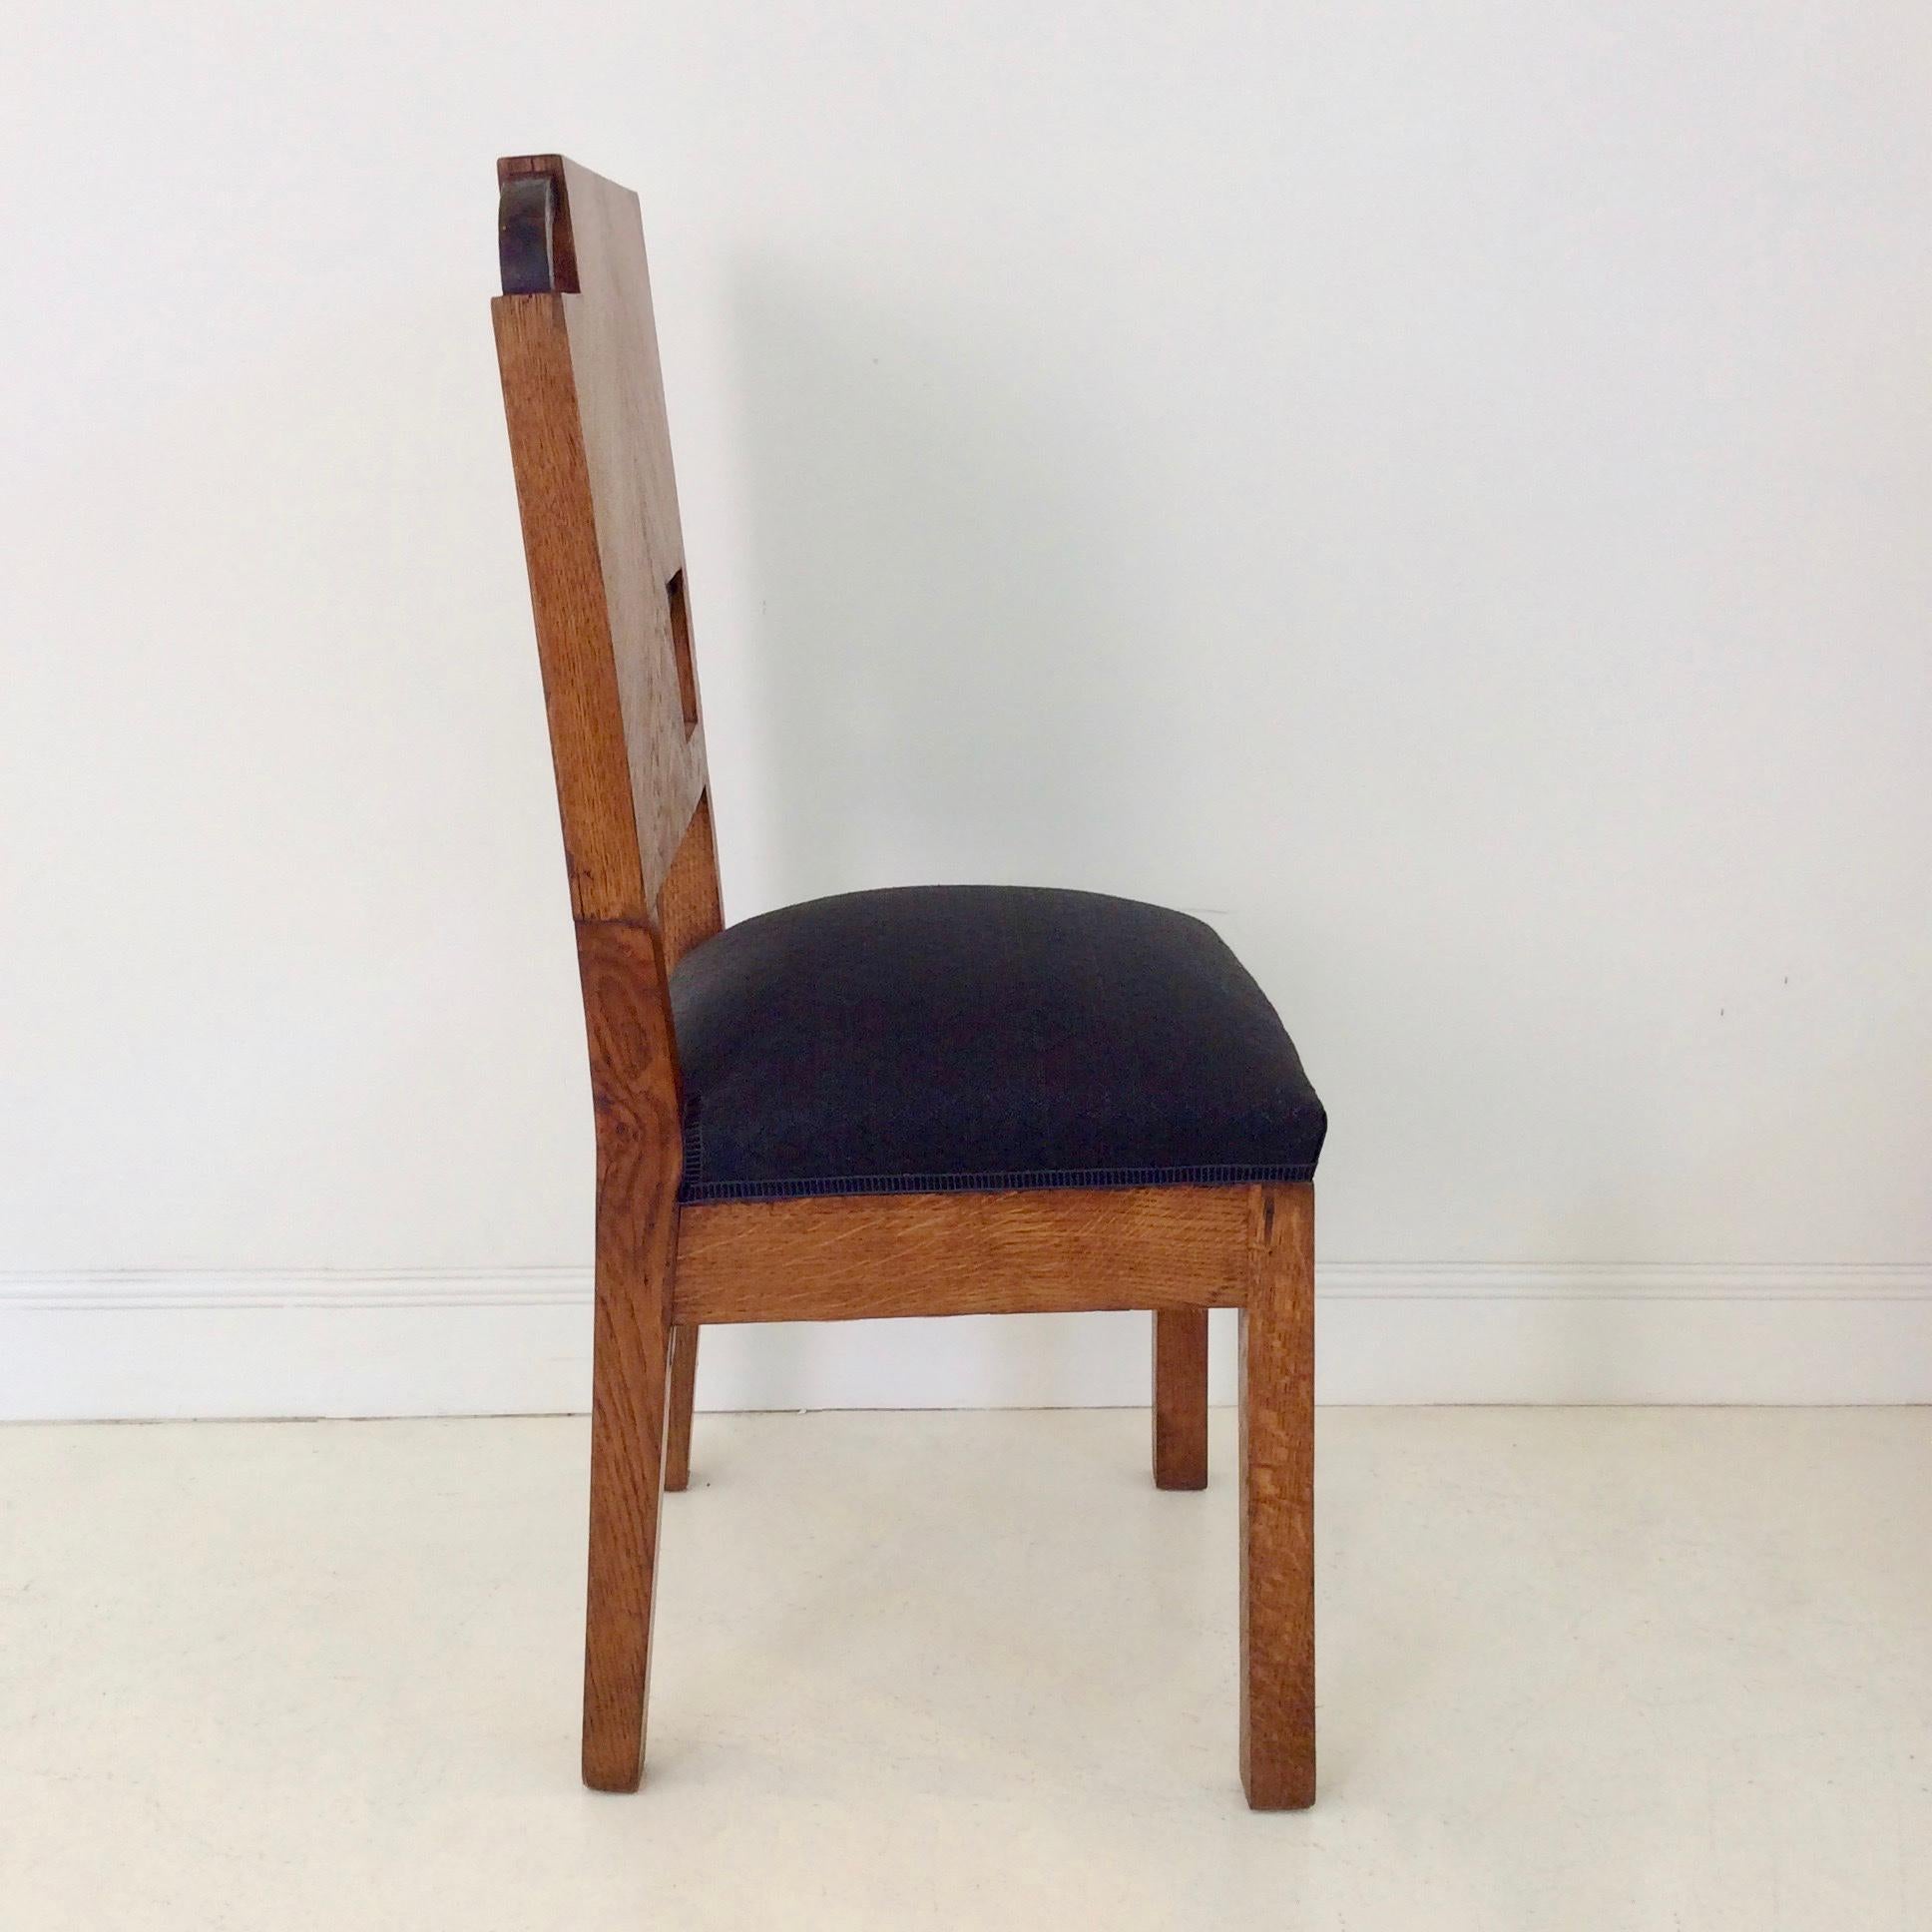 Special Art Deco chair with a nice composition, circa 1930, France.
Oak, blackened oak and black fabric.
Dimensions: 92 cm H, 45 cm W, 43 cm D, seat height 45 cm.
We ship worldwide.
All purchases are covered by our Buyer Protection Guarantee.
This